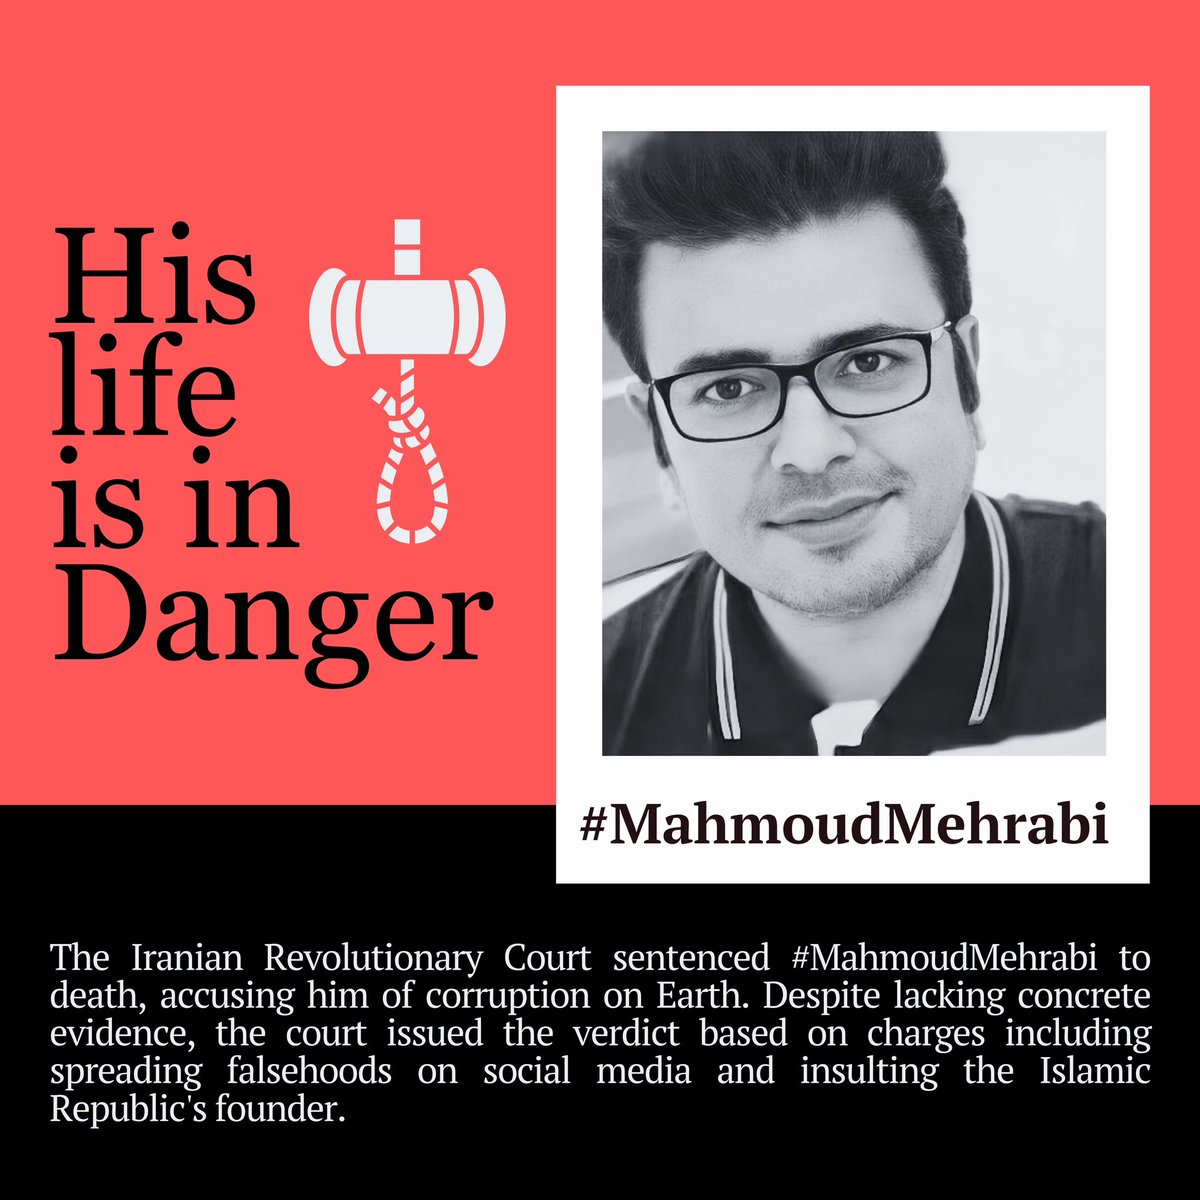 After 460+ days of severe torture and solitary confinement, 35 year-old #MahmoudMehrabi has been sentenced to death by the Islamic Republic regime.
Let us be his voice before it is too late!
#محمود_مهرابی
#StopExecutionsInIran